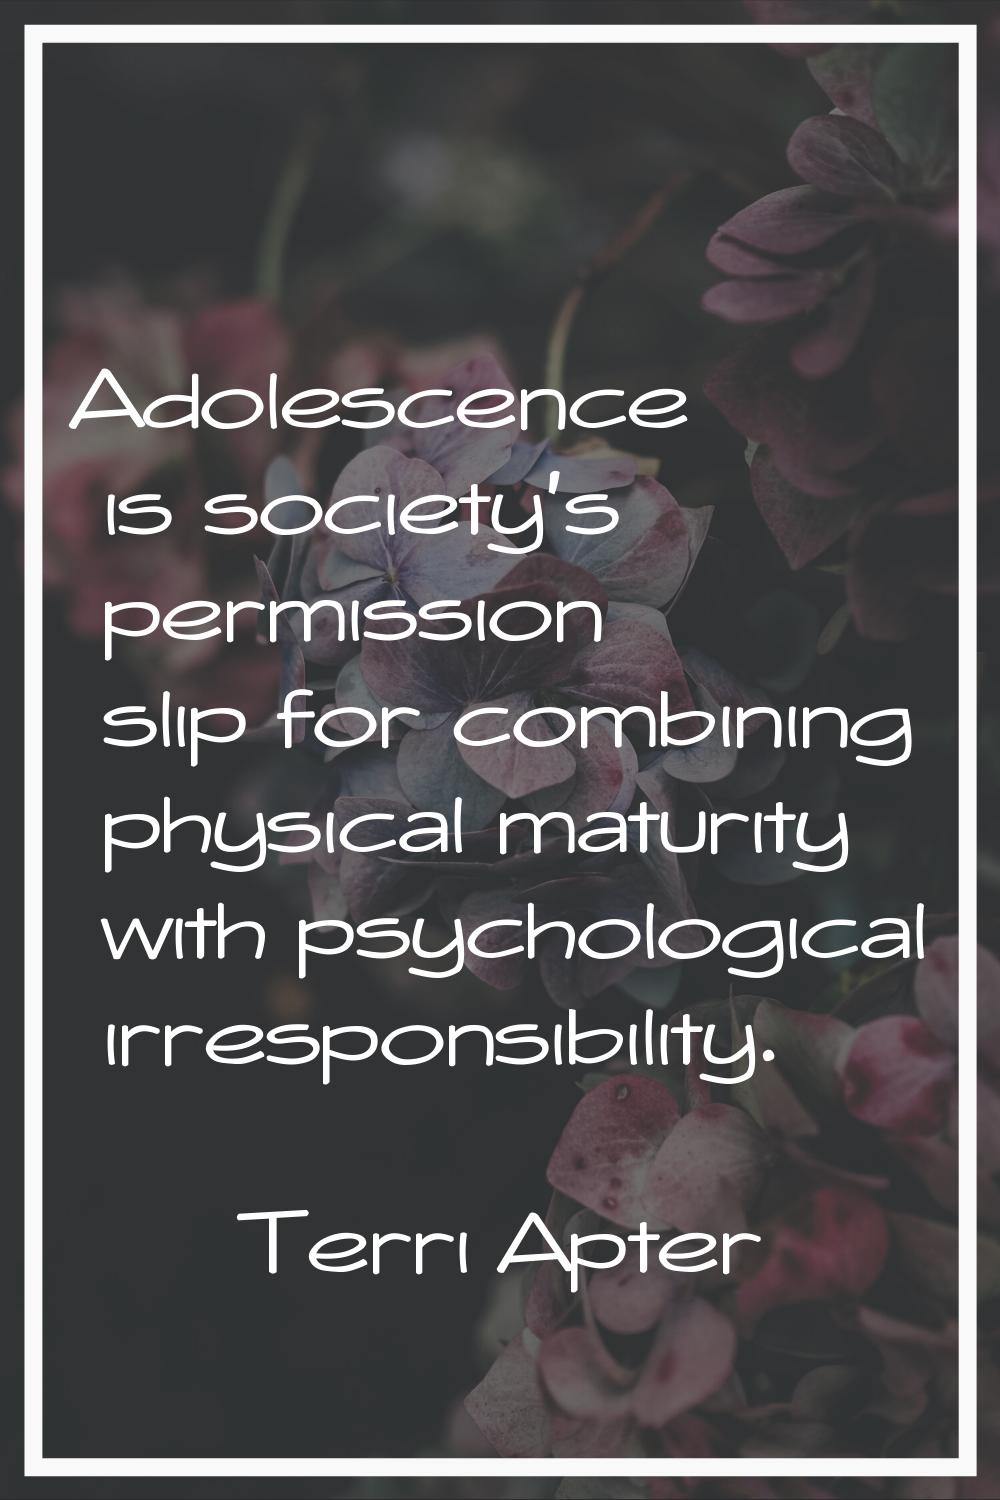 Adolescence is society's permission slip for combining physical maturity with psychological irrespo